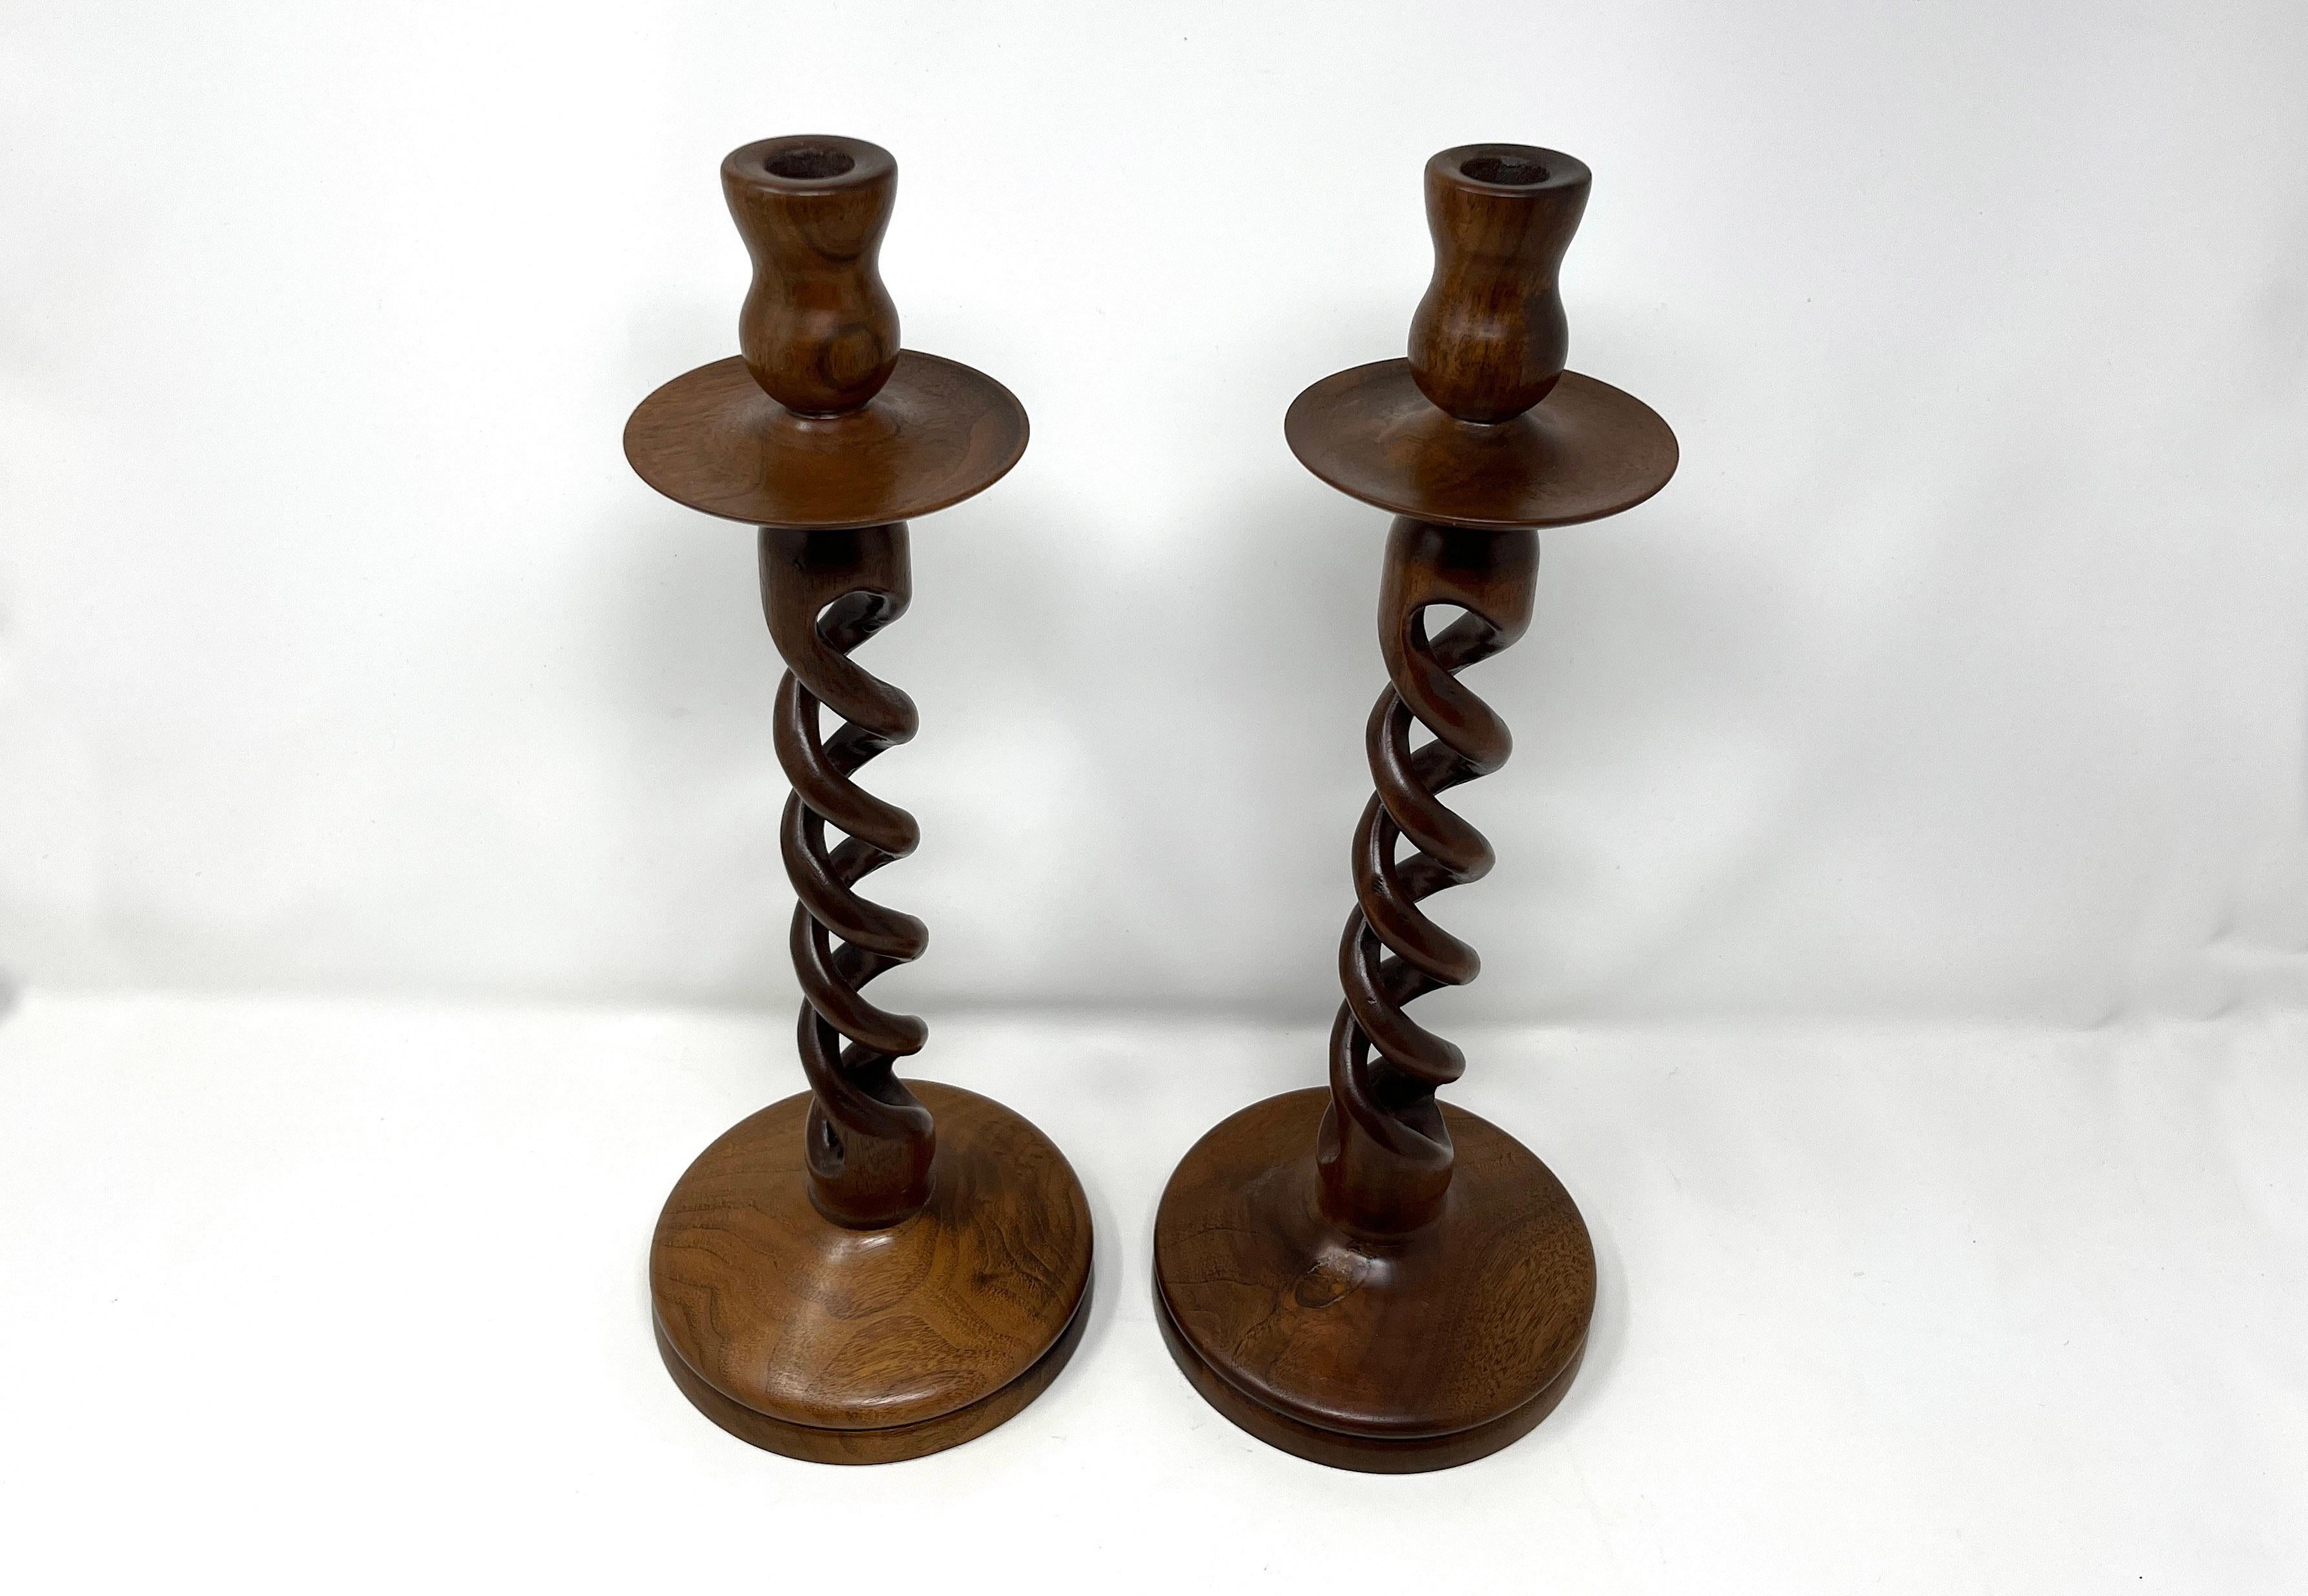 Hand carved solid wood candlesticks in the classic English barley twist or open twist style. The center open twist section is carved from a single piece of wood. Exact age and maker unknown.

Excellent vintage condition. Appear to be unused.

They